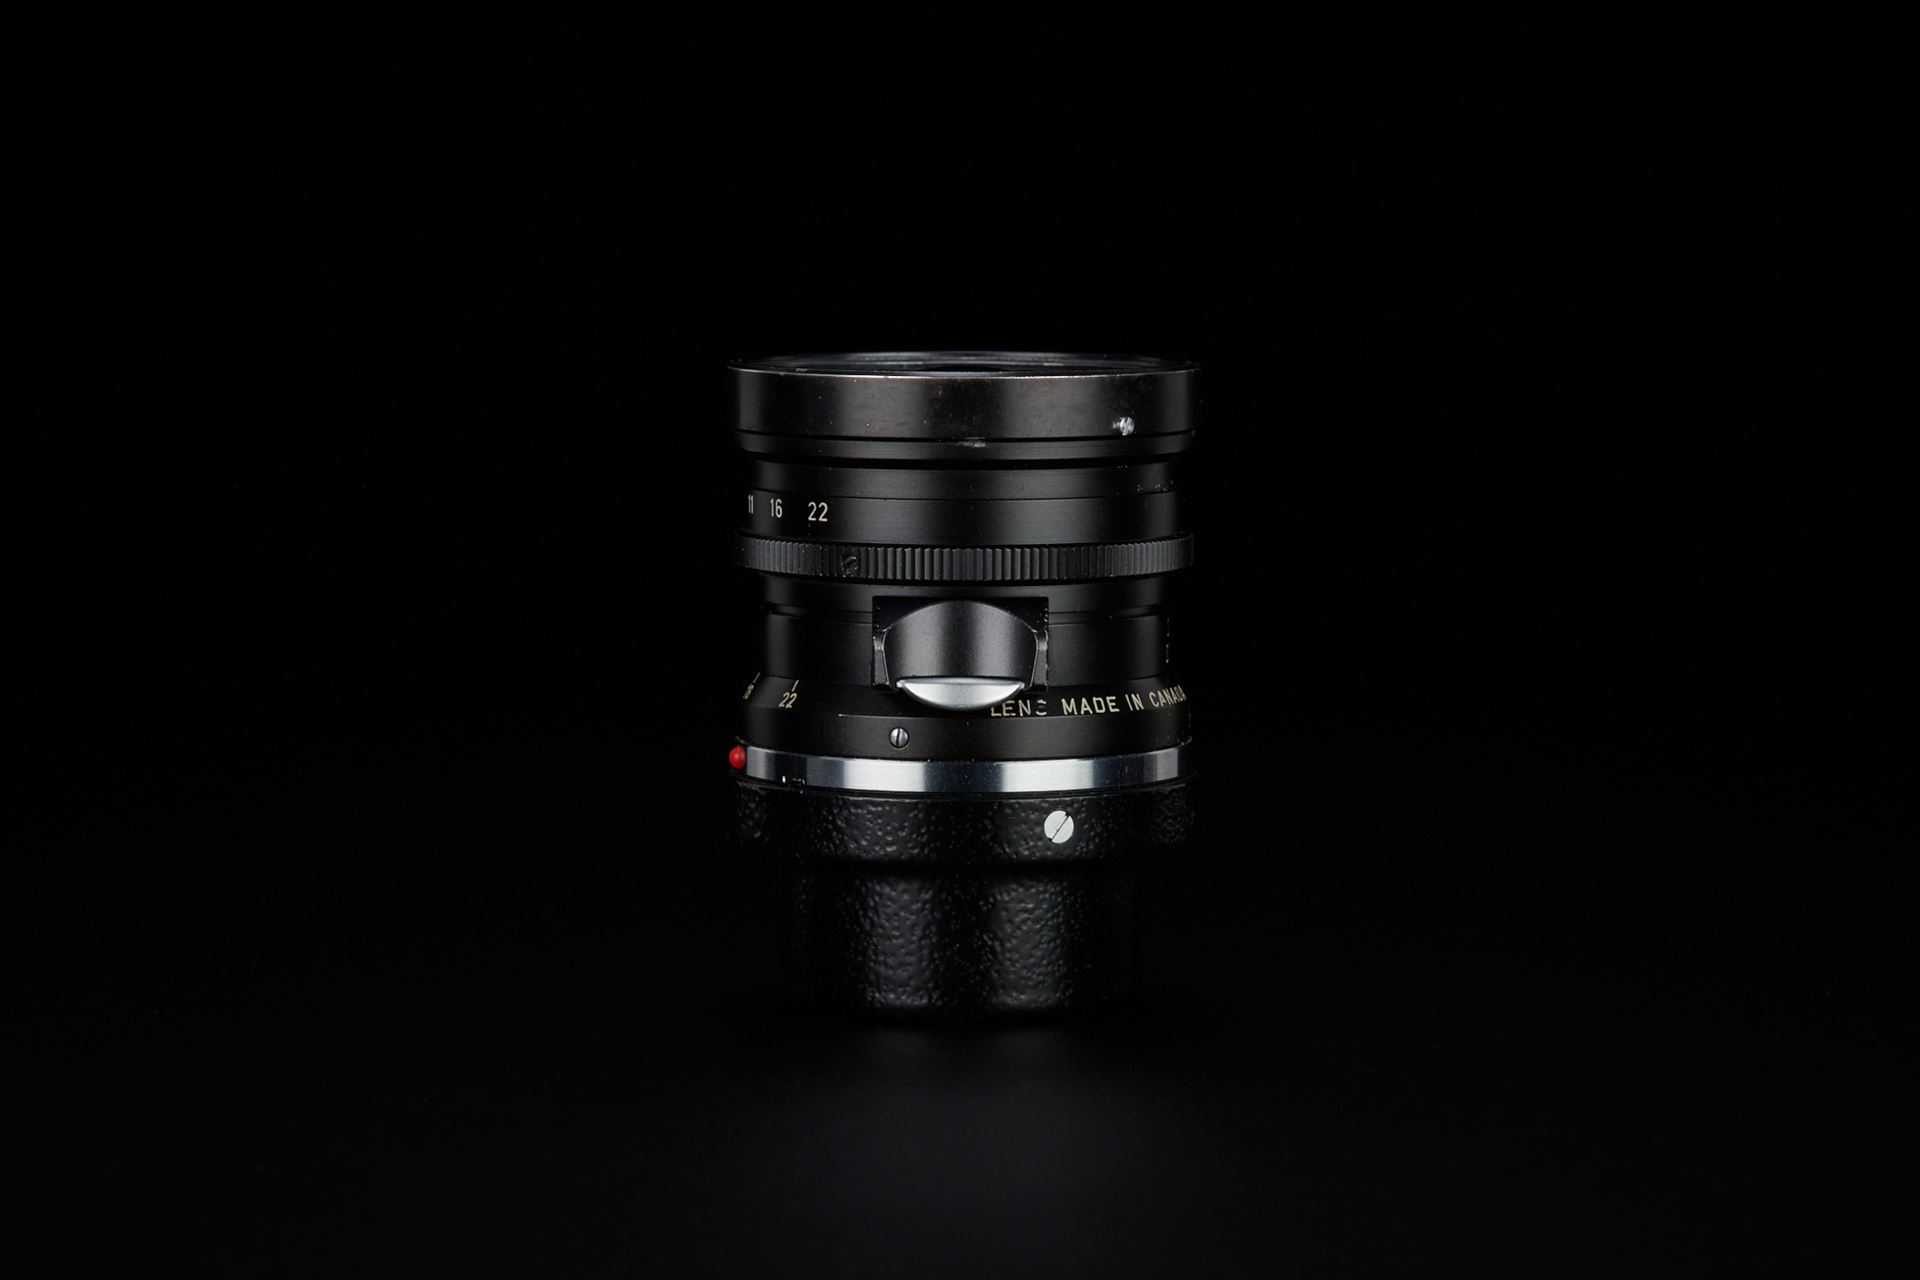 Picture of Leica Elmarit-M 28mm f/2.8 Ver. 2 early batch